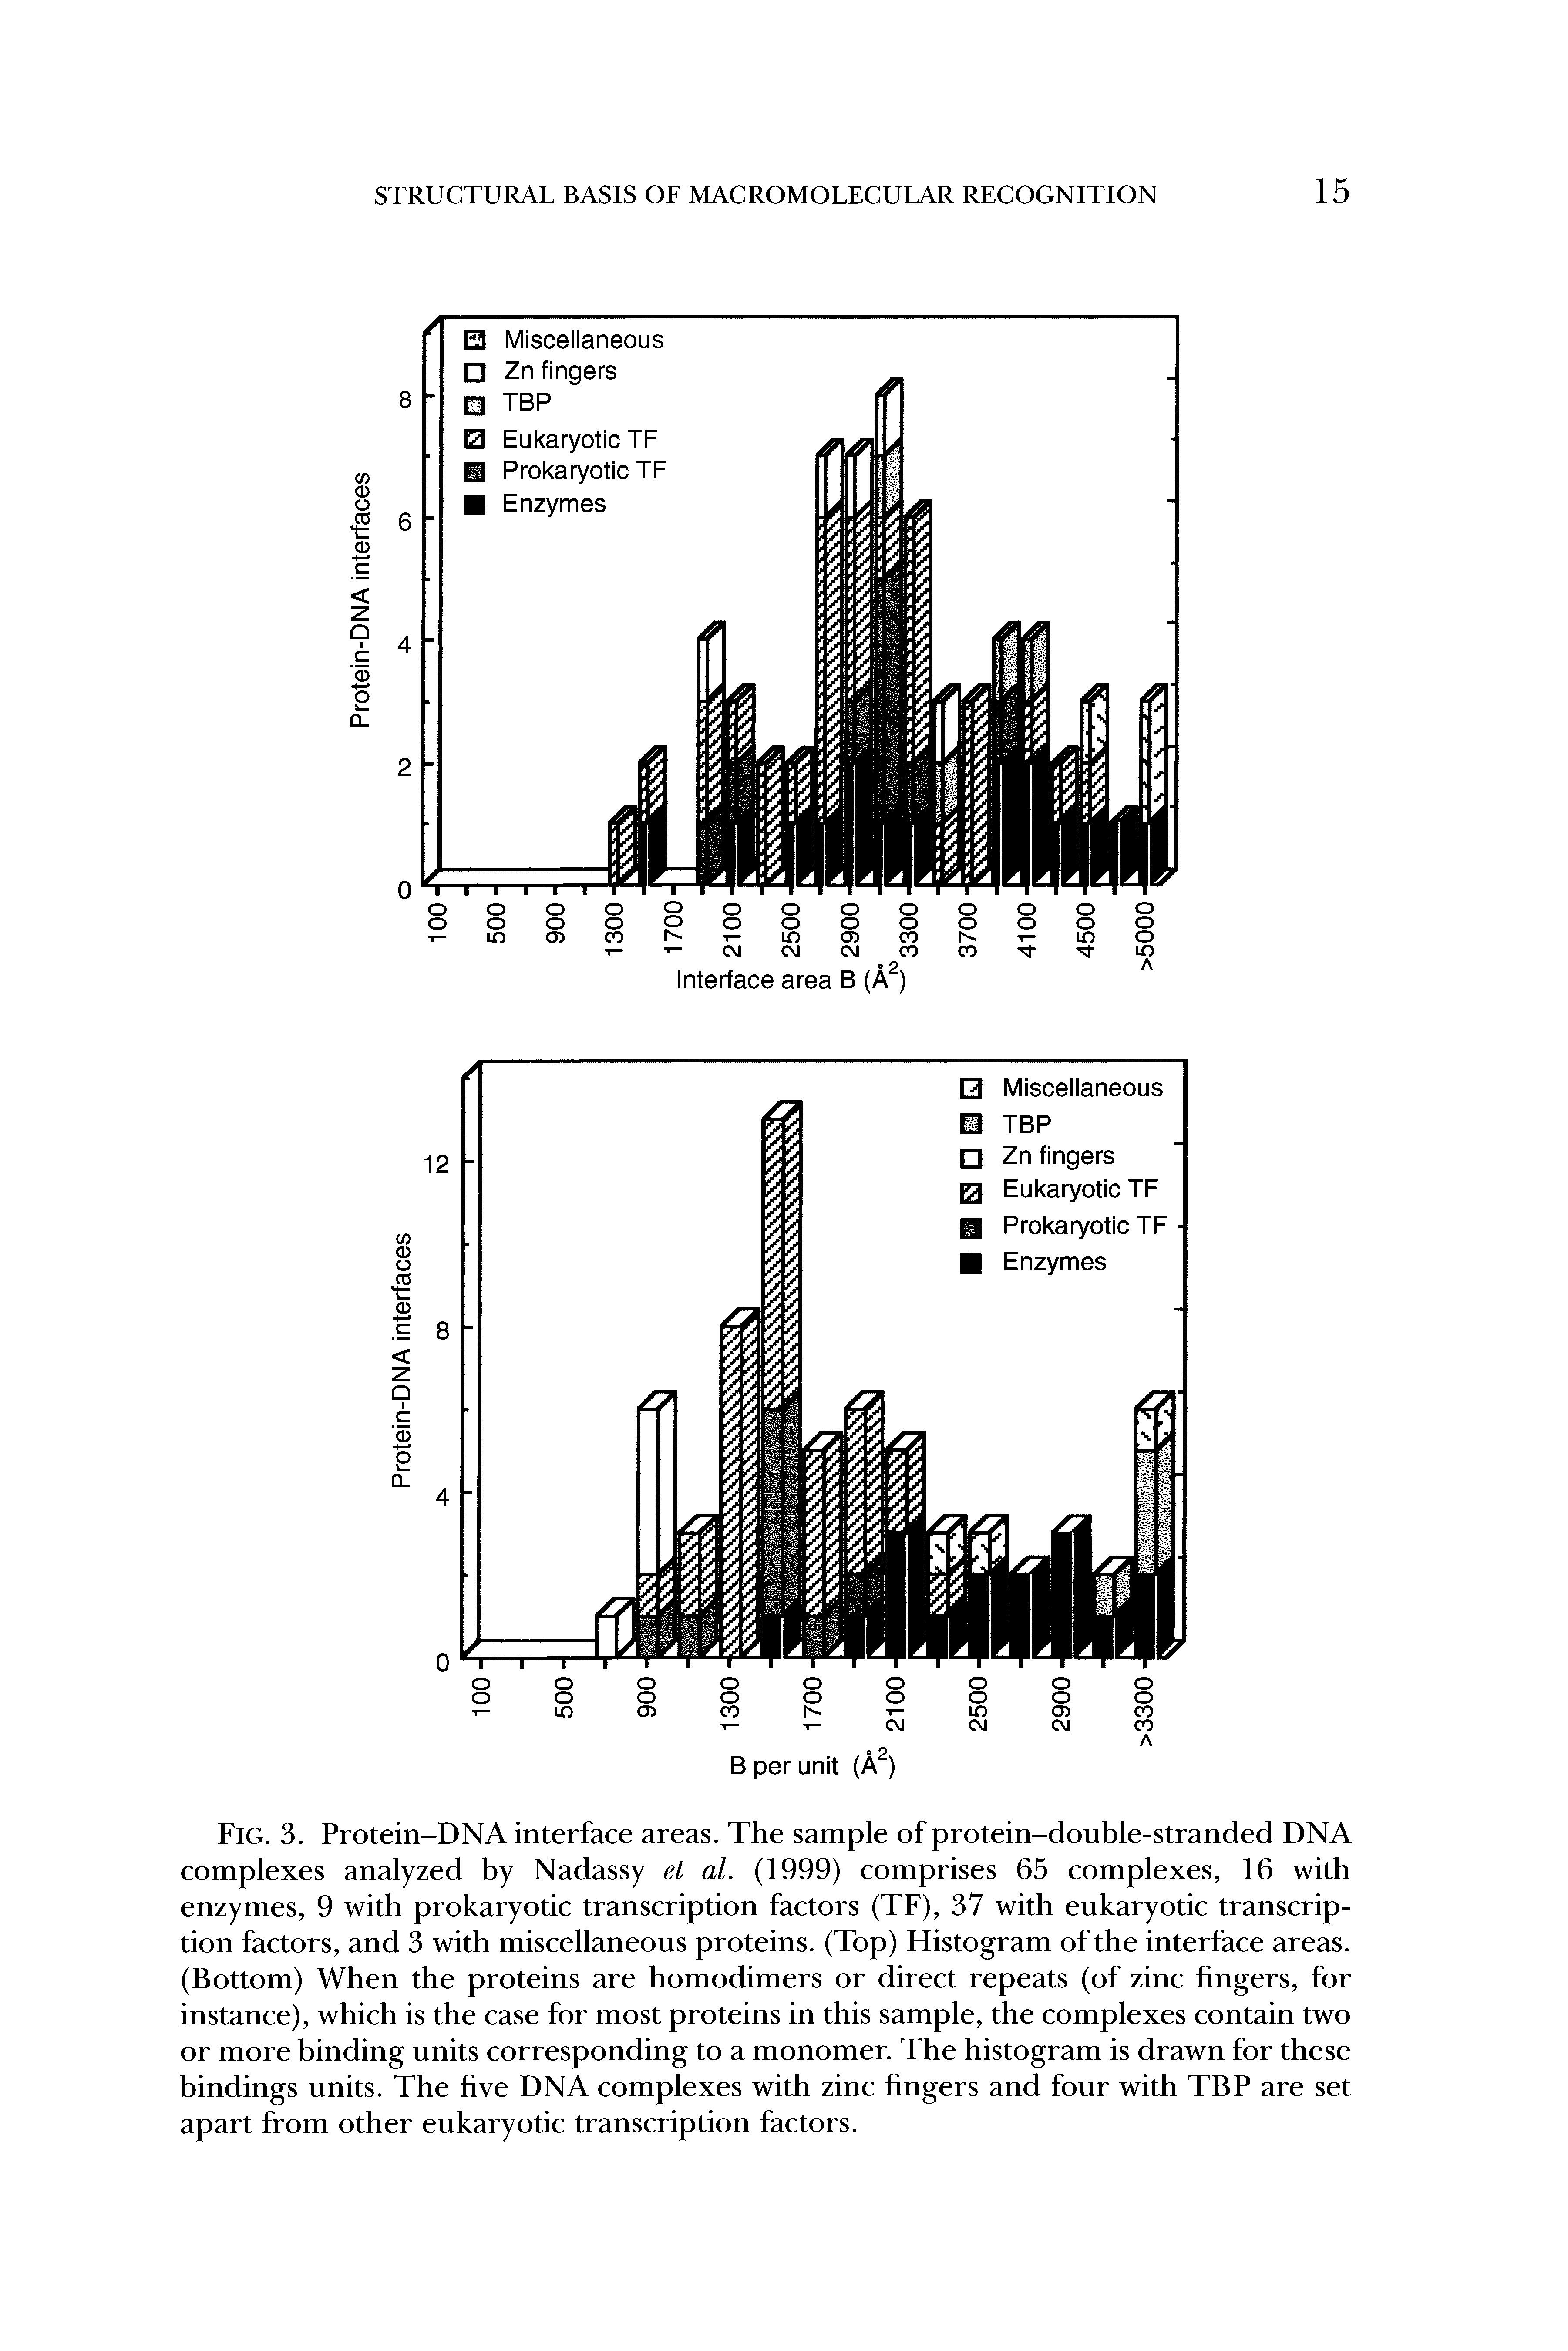 Fig. 3. Protein-DNA interface areas. The sample of protein-double-stranded DNA complexes analyzed by Nadassy et al. (1999) comprises 65 complexes, 16 with enzymes, 9 with prokaryotic transcription factors (TF), 37 with eukaryotic transcription factors, and 3 with miscellaneous proteins. (Top) Histogram of the interface areas. (Bottom) When the proteins are homodimers or direct repeats (of zinc fingers, for instance), which is the case for most proteins in this sample, the complexes contain two or more binding units corresponding to a monomer. The histogram is drawn for these bindings units. The five DNA complexes with zinc fingers and four with TBP are set apart from other eukaryotic transcription factors.